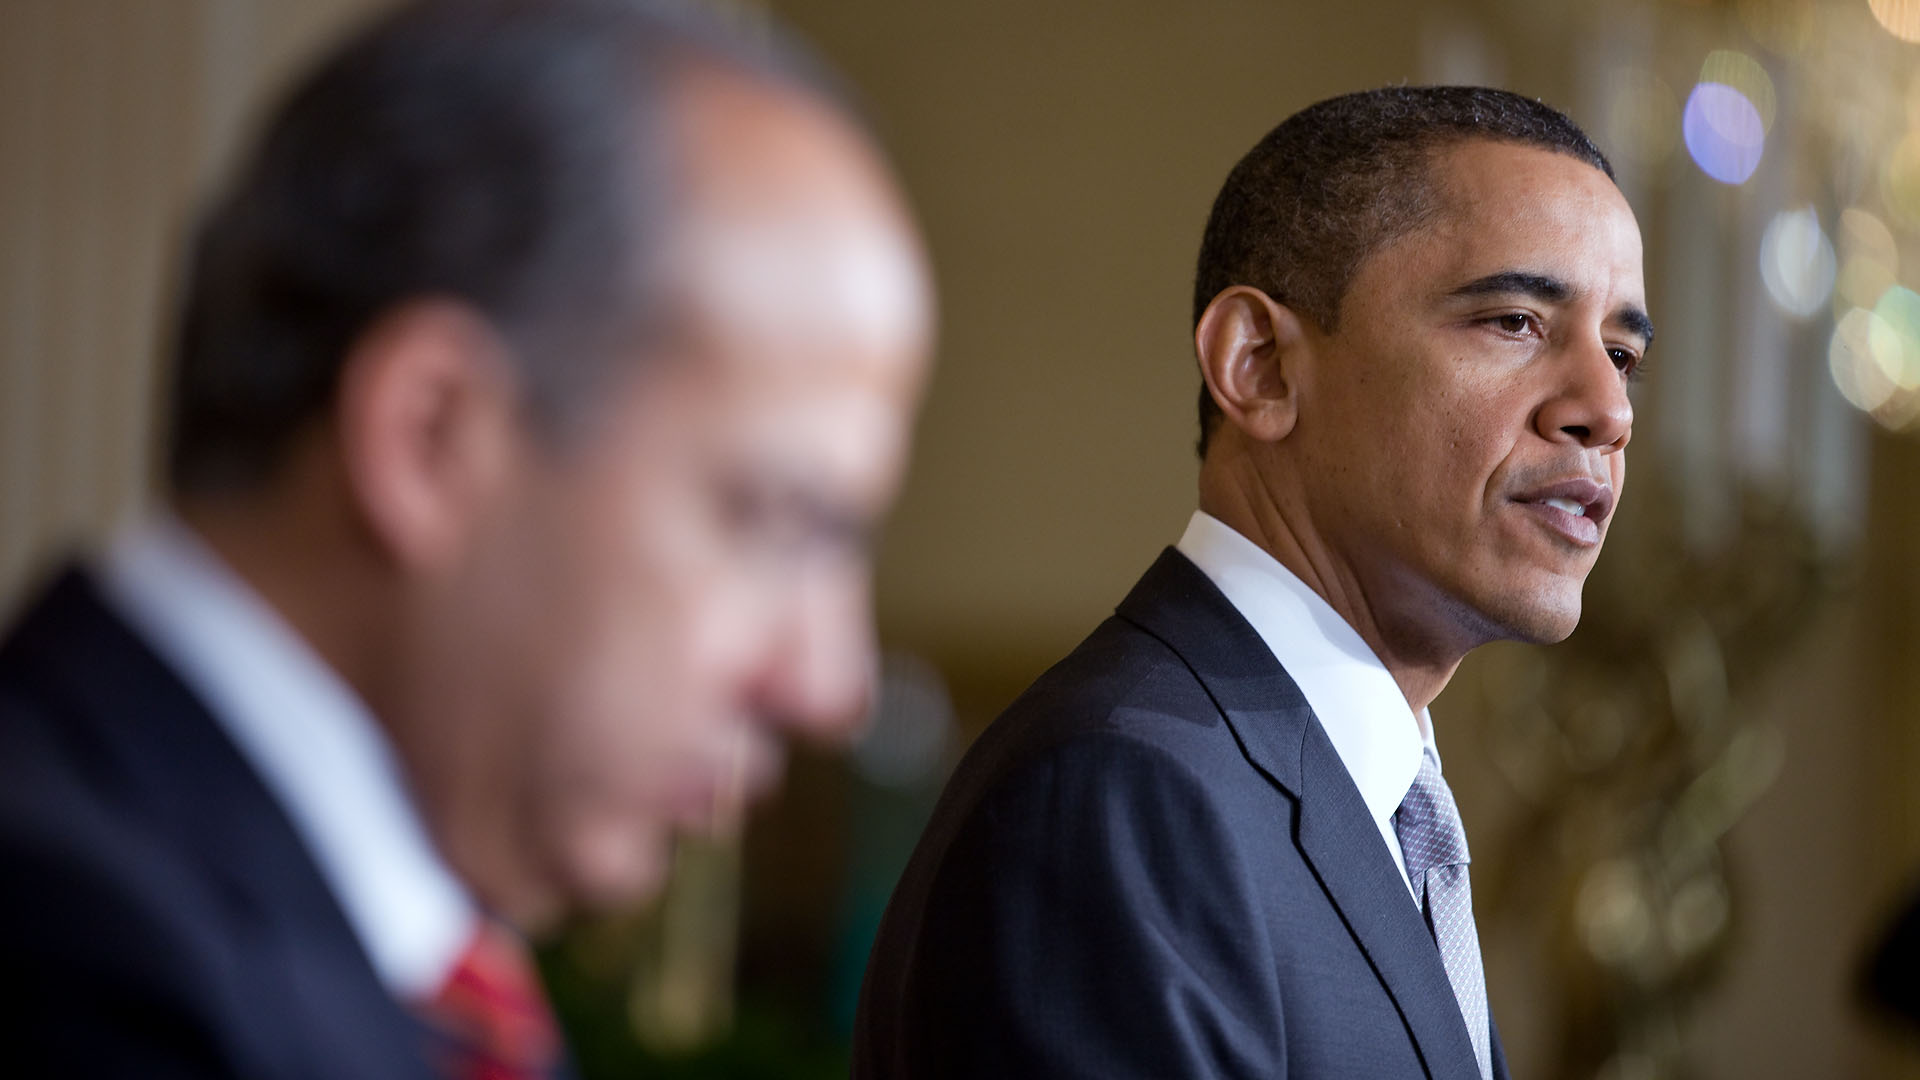 President Barack Obama addresses the Situation in Libya During a Joint Press Conference with President Felipe Calderon of Mexico